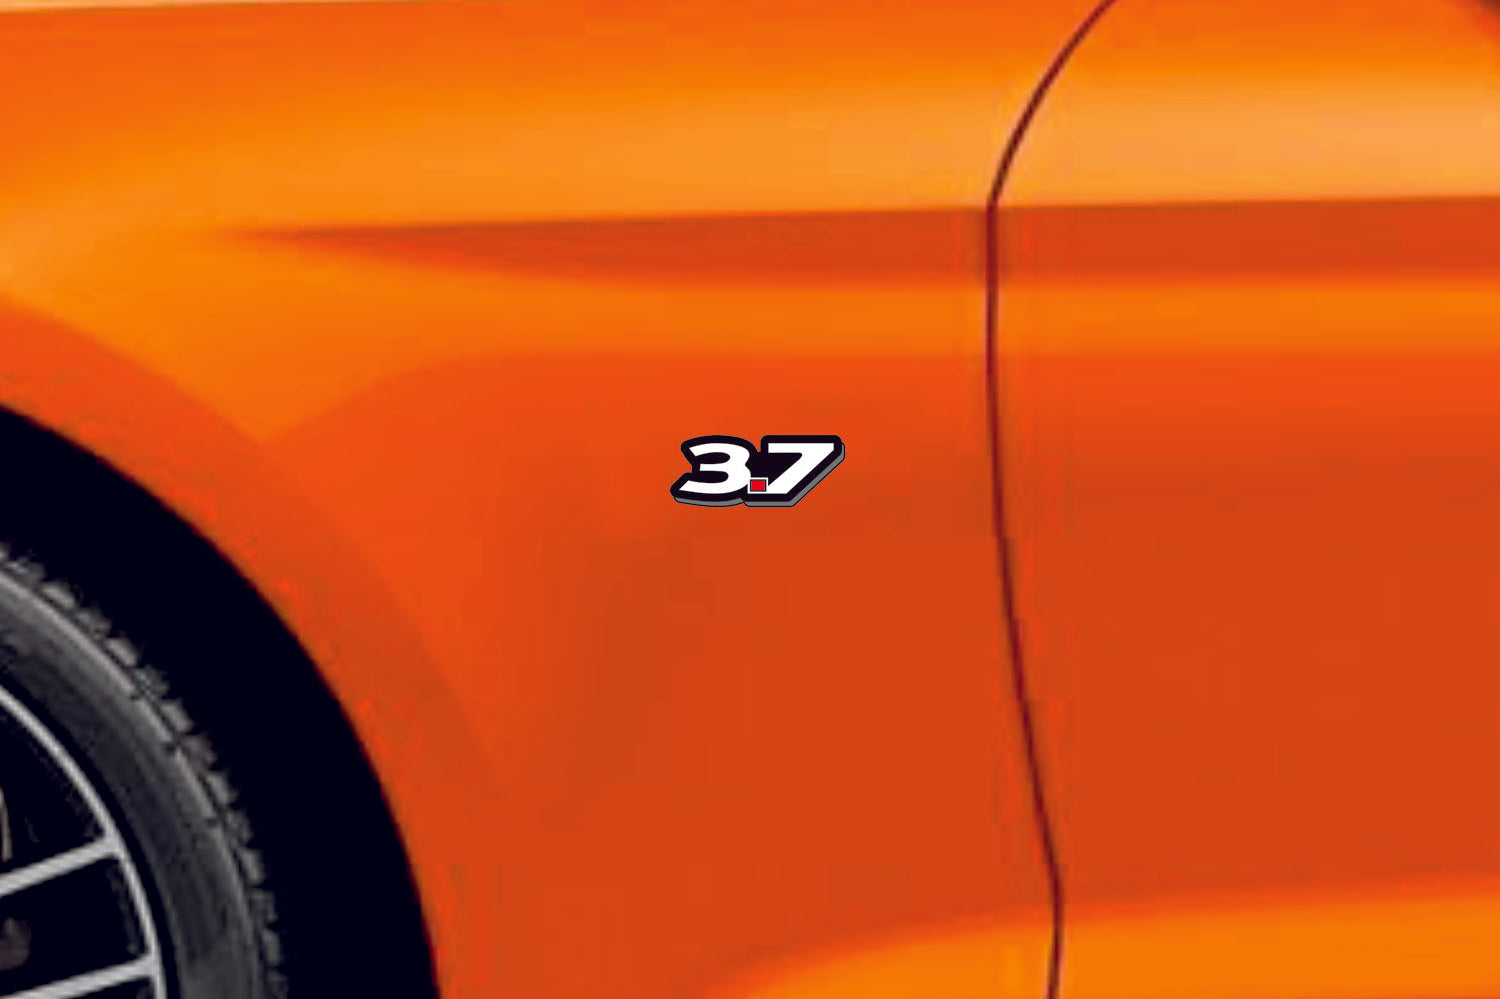 Ford Mustang emblem for fenders with 3.7 logo